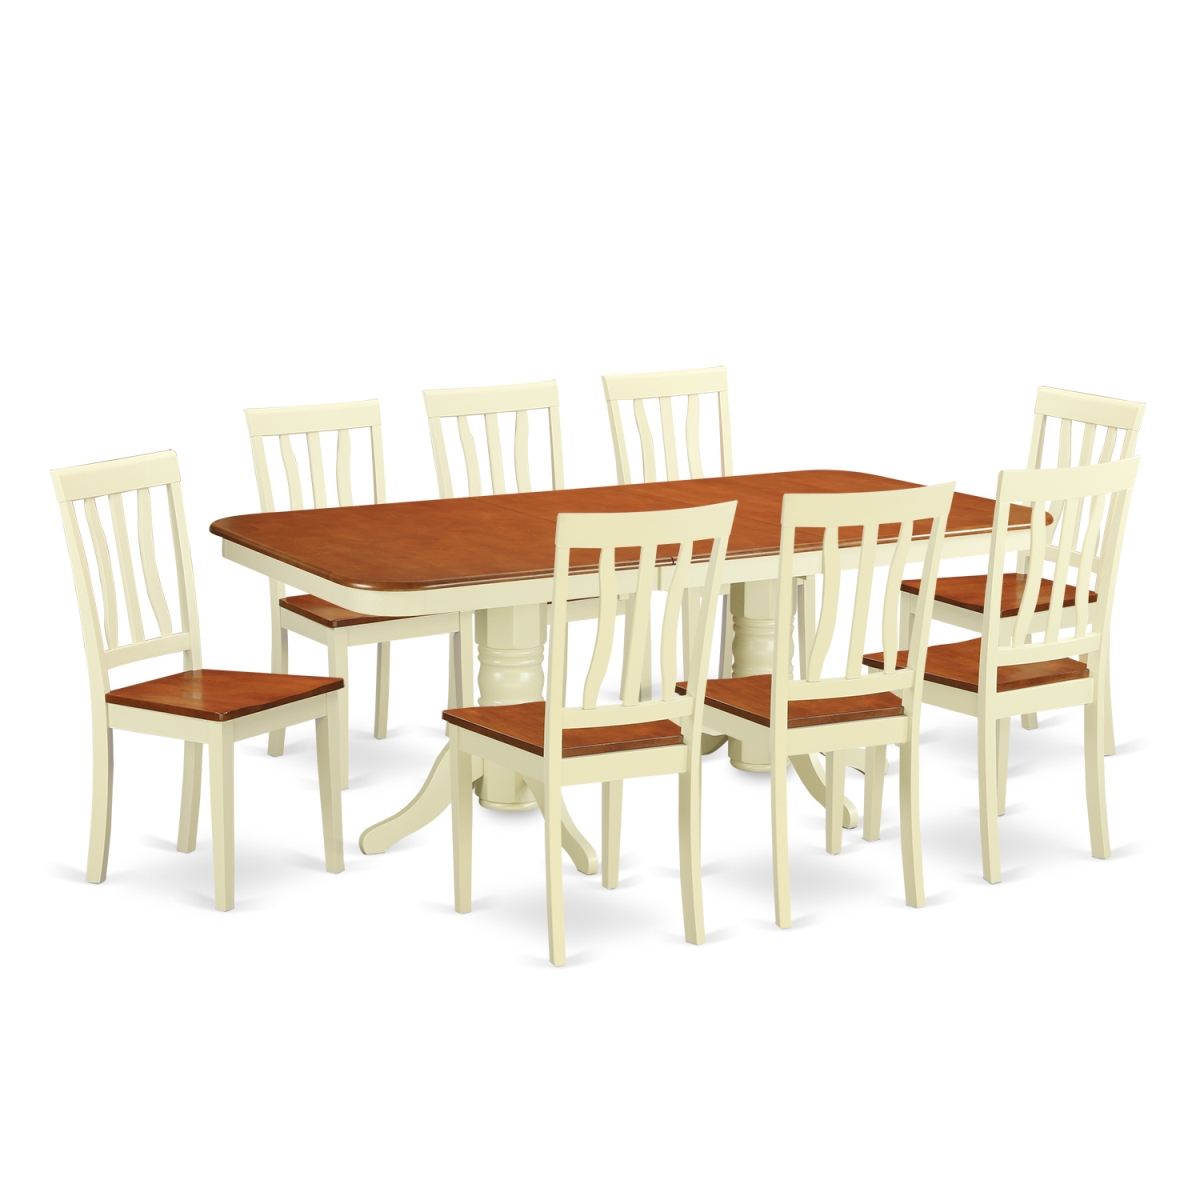 Dinette Set With 8 Table & 8 Chairs, Buttermilk & Cherry - 9 Piece